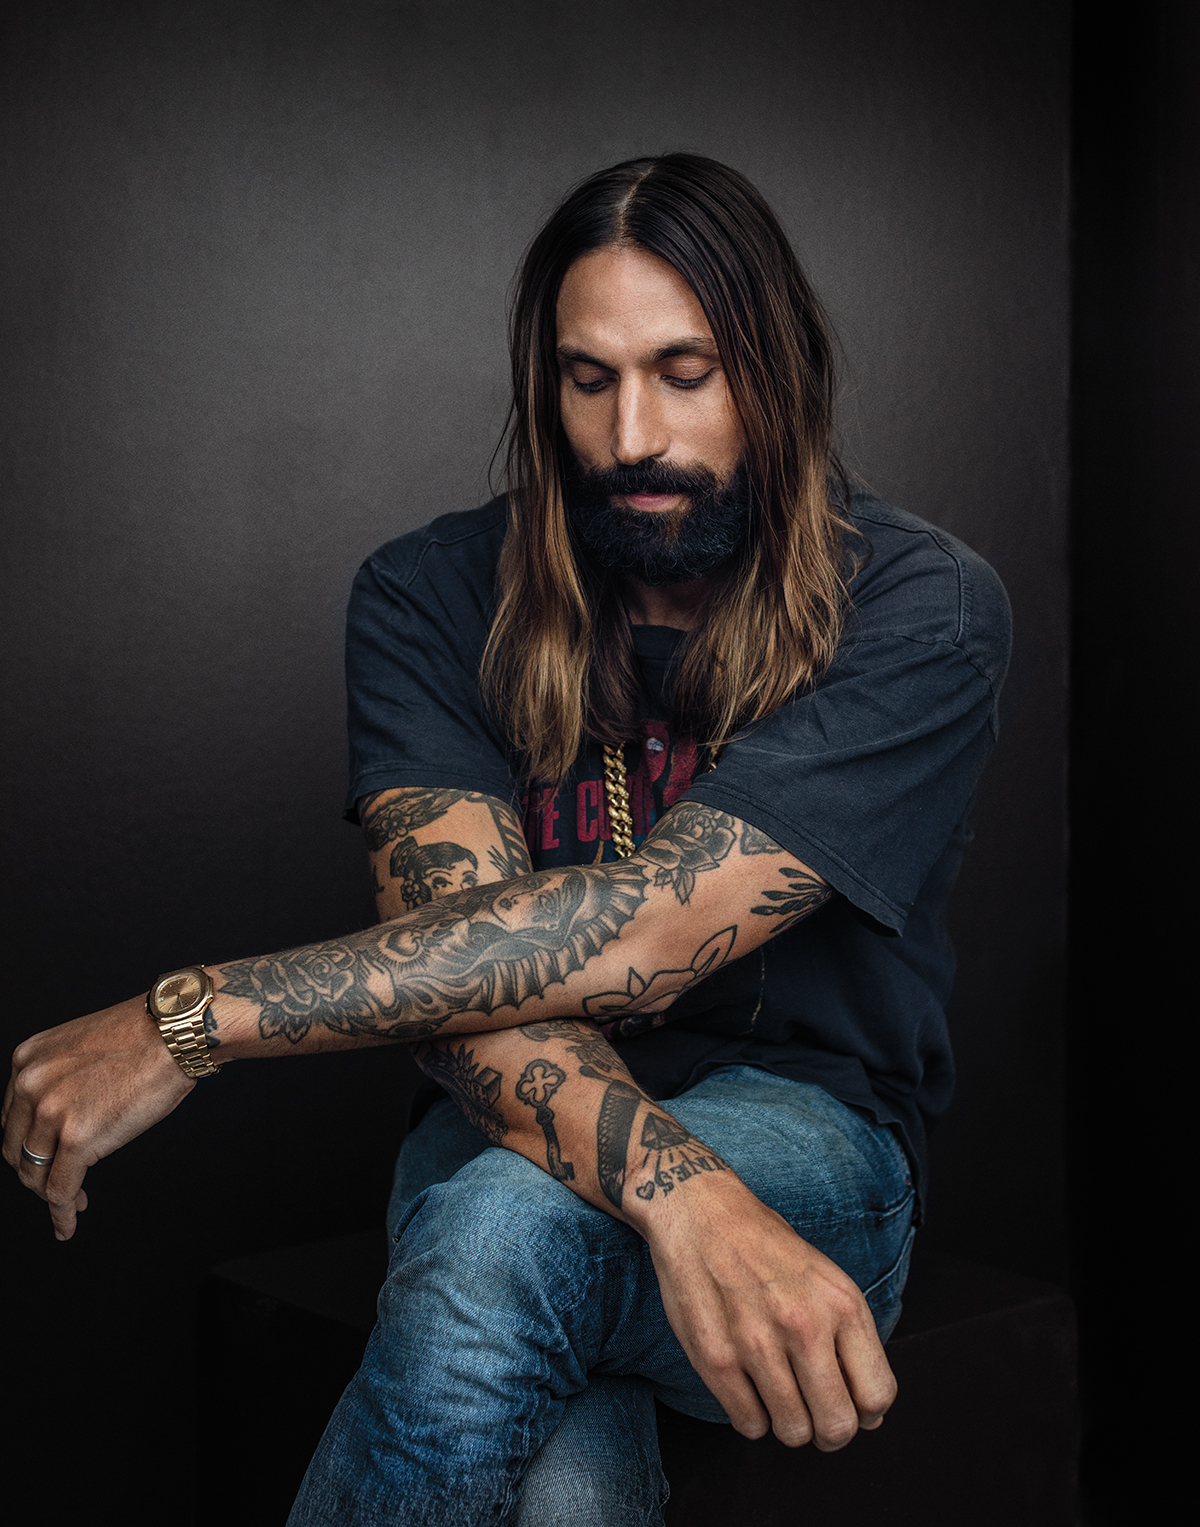 Ben Gorham of Byredo Shares a Life Story Inspired By Design